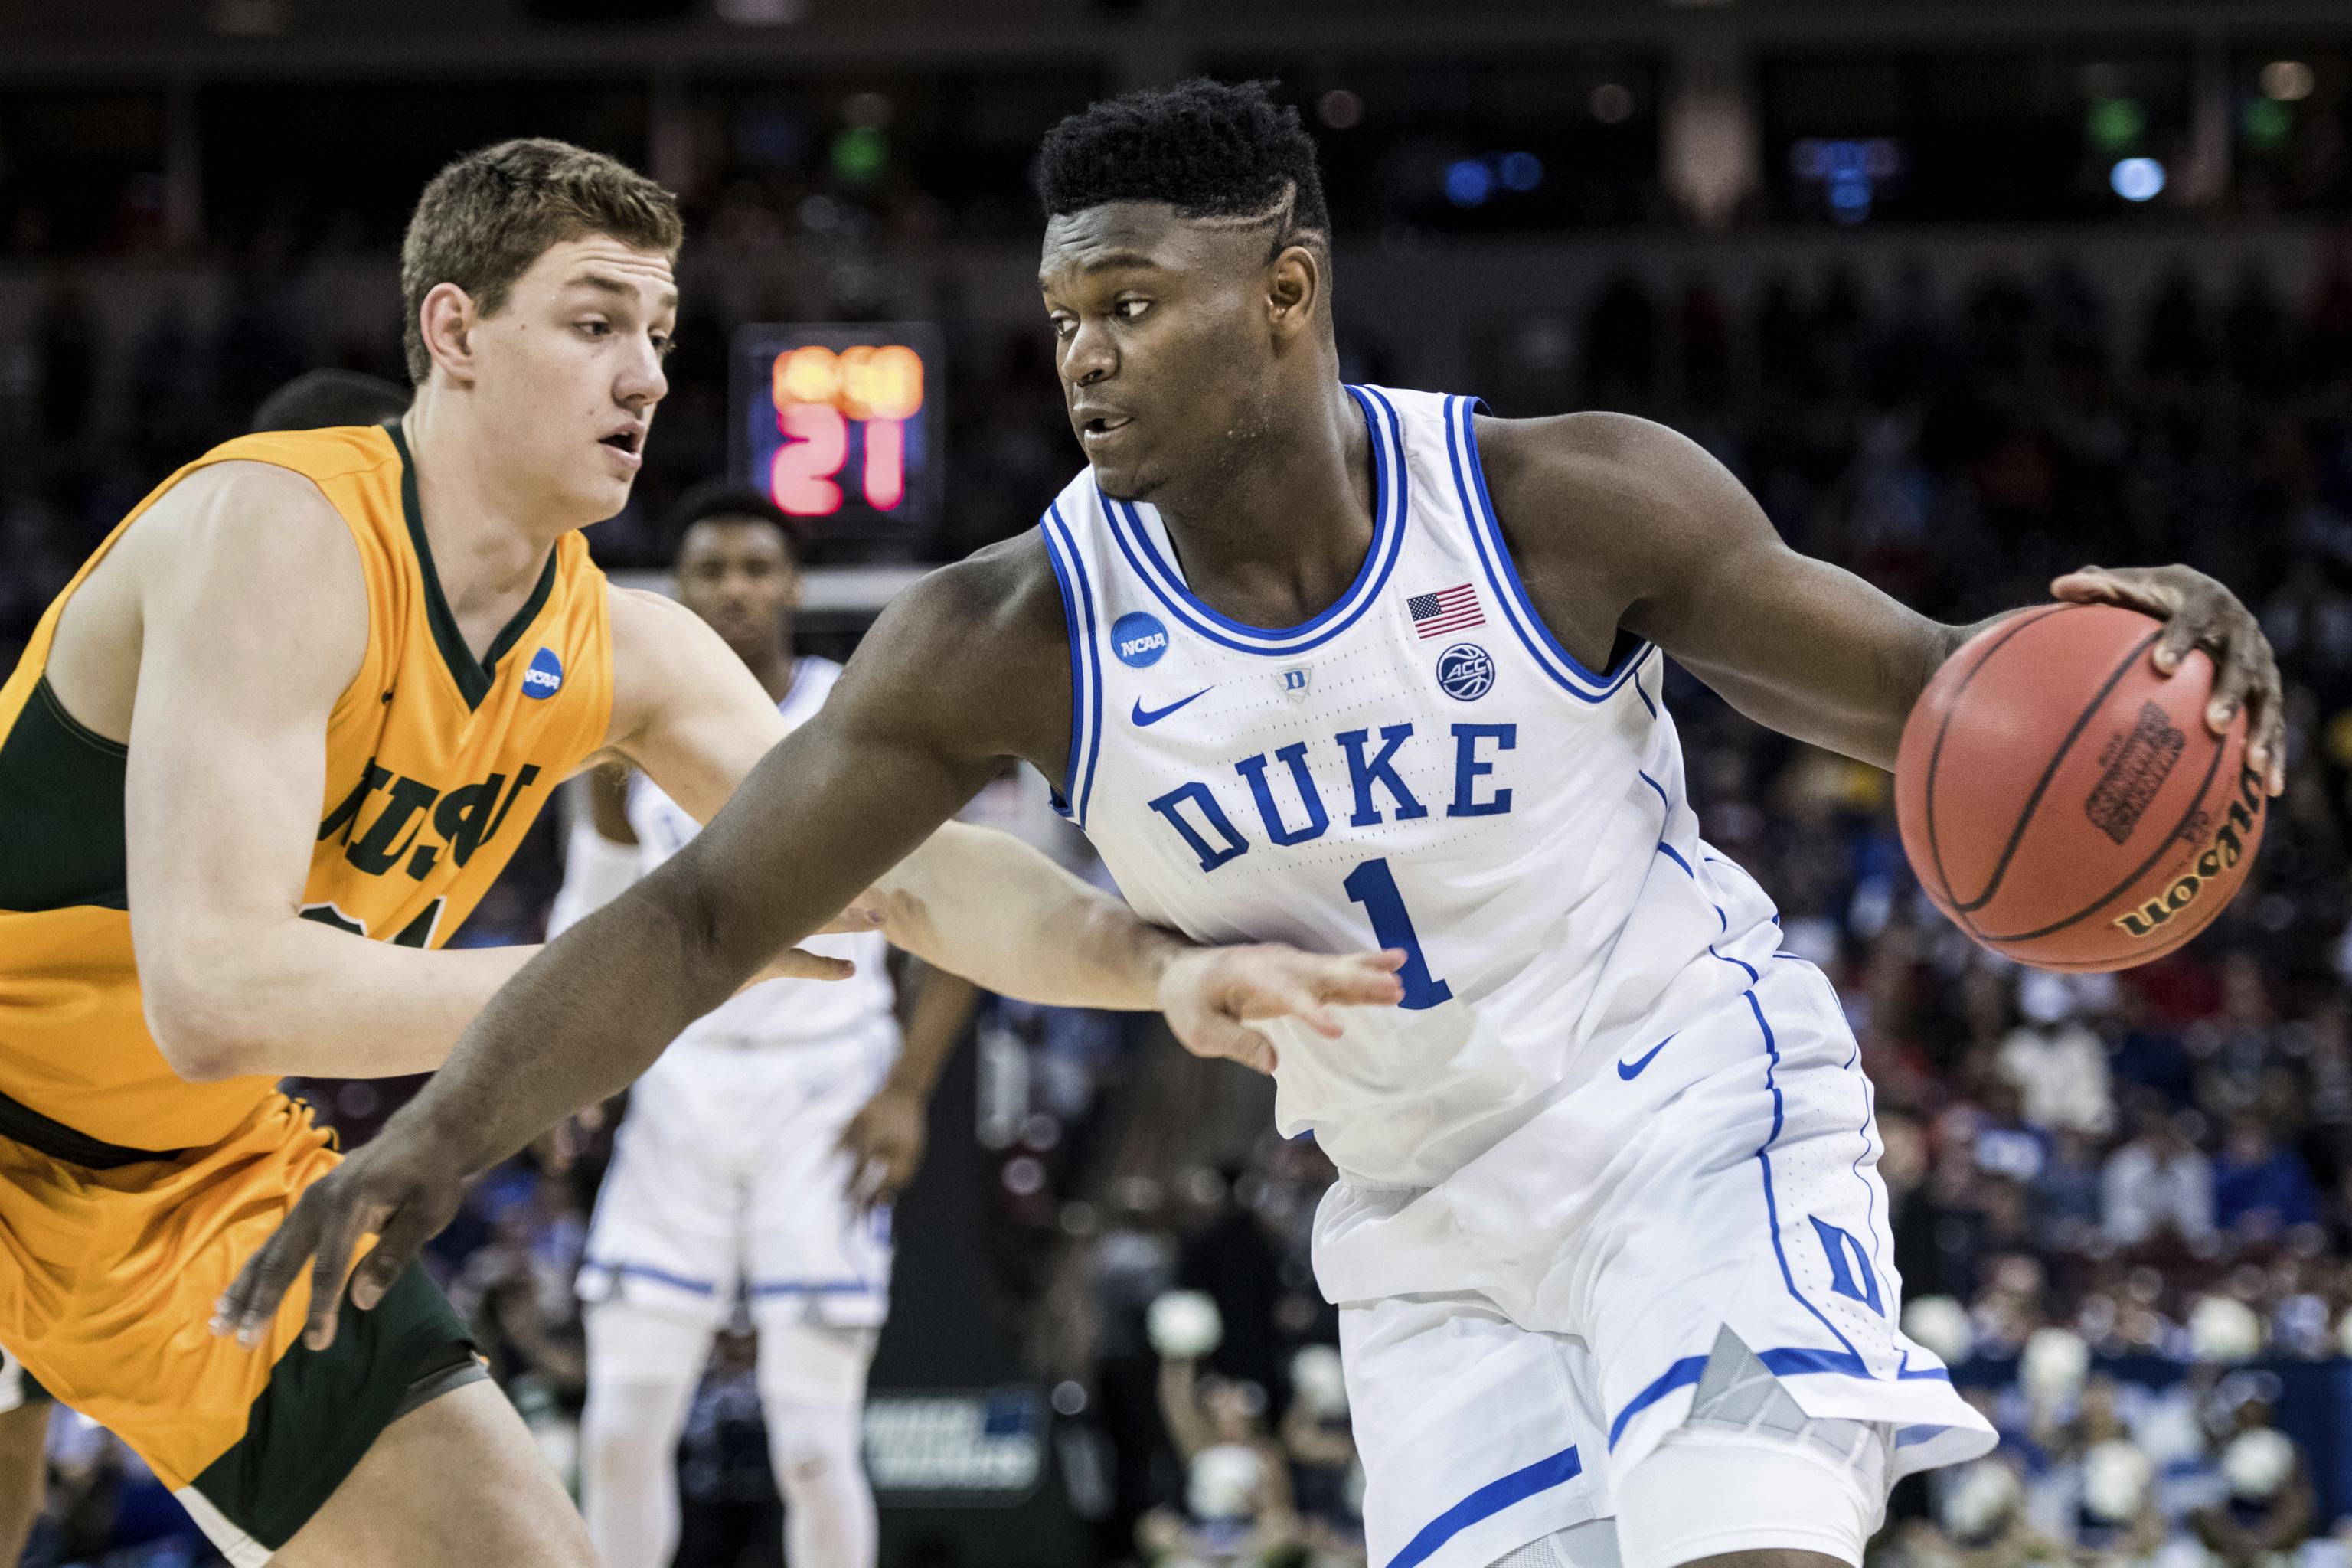 Nba Draft 2019 Complete 1st Round Mock Draft And More Bleacher Report Latest News Videos And Highlights